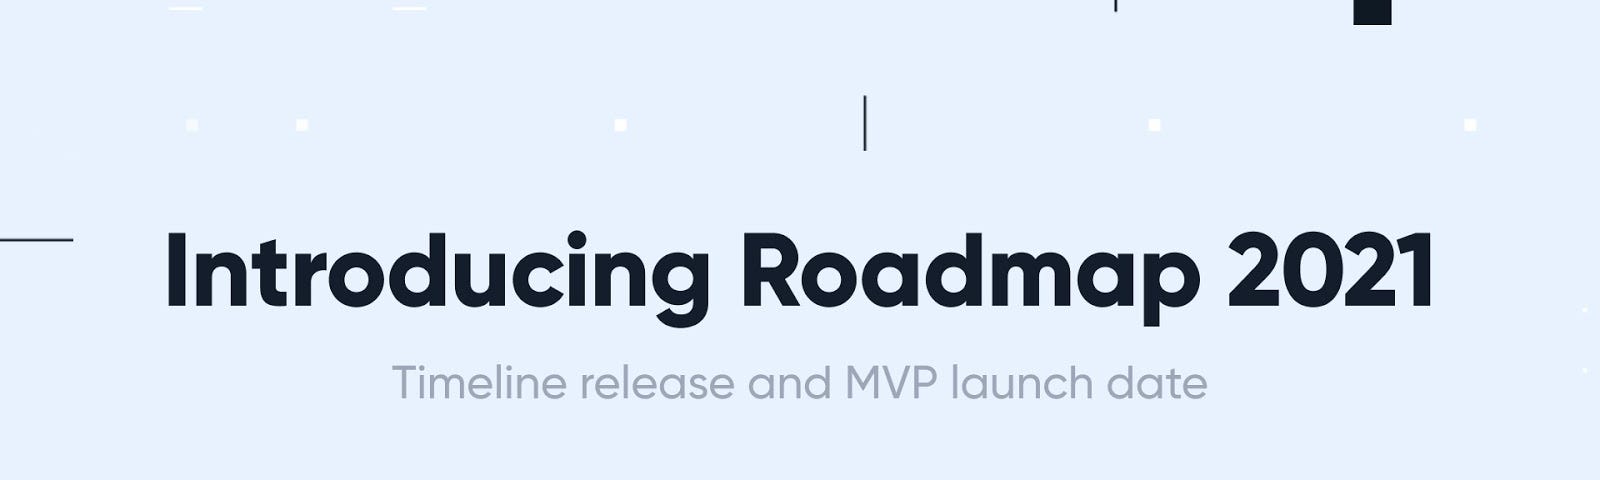 Introducing our roadmap for 2021 and MVP launch date